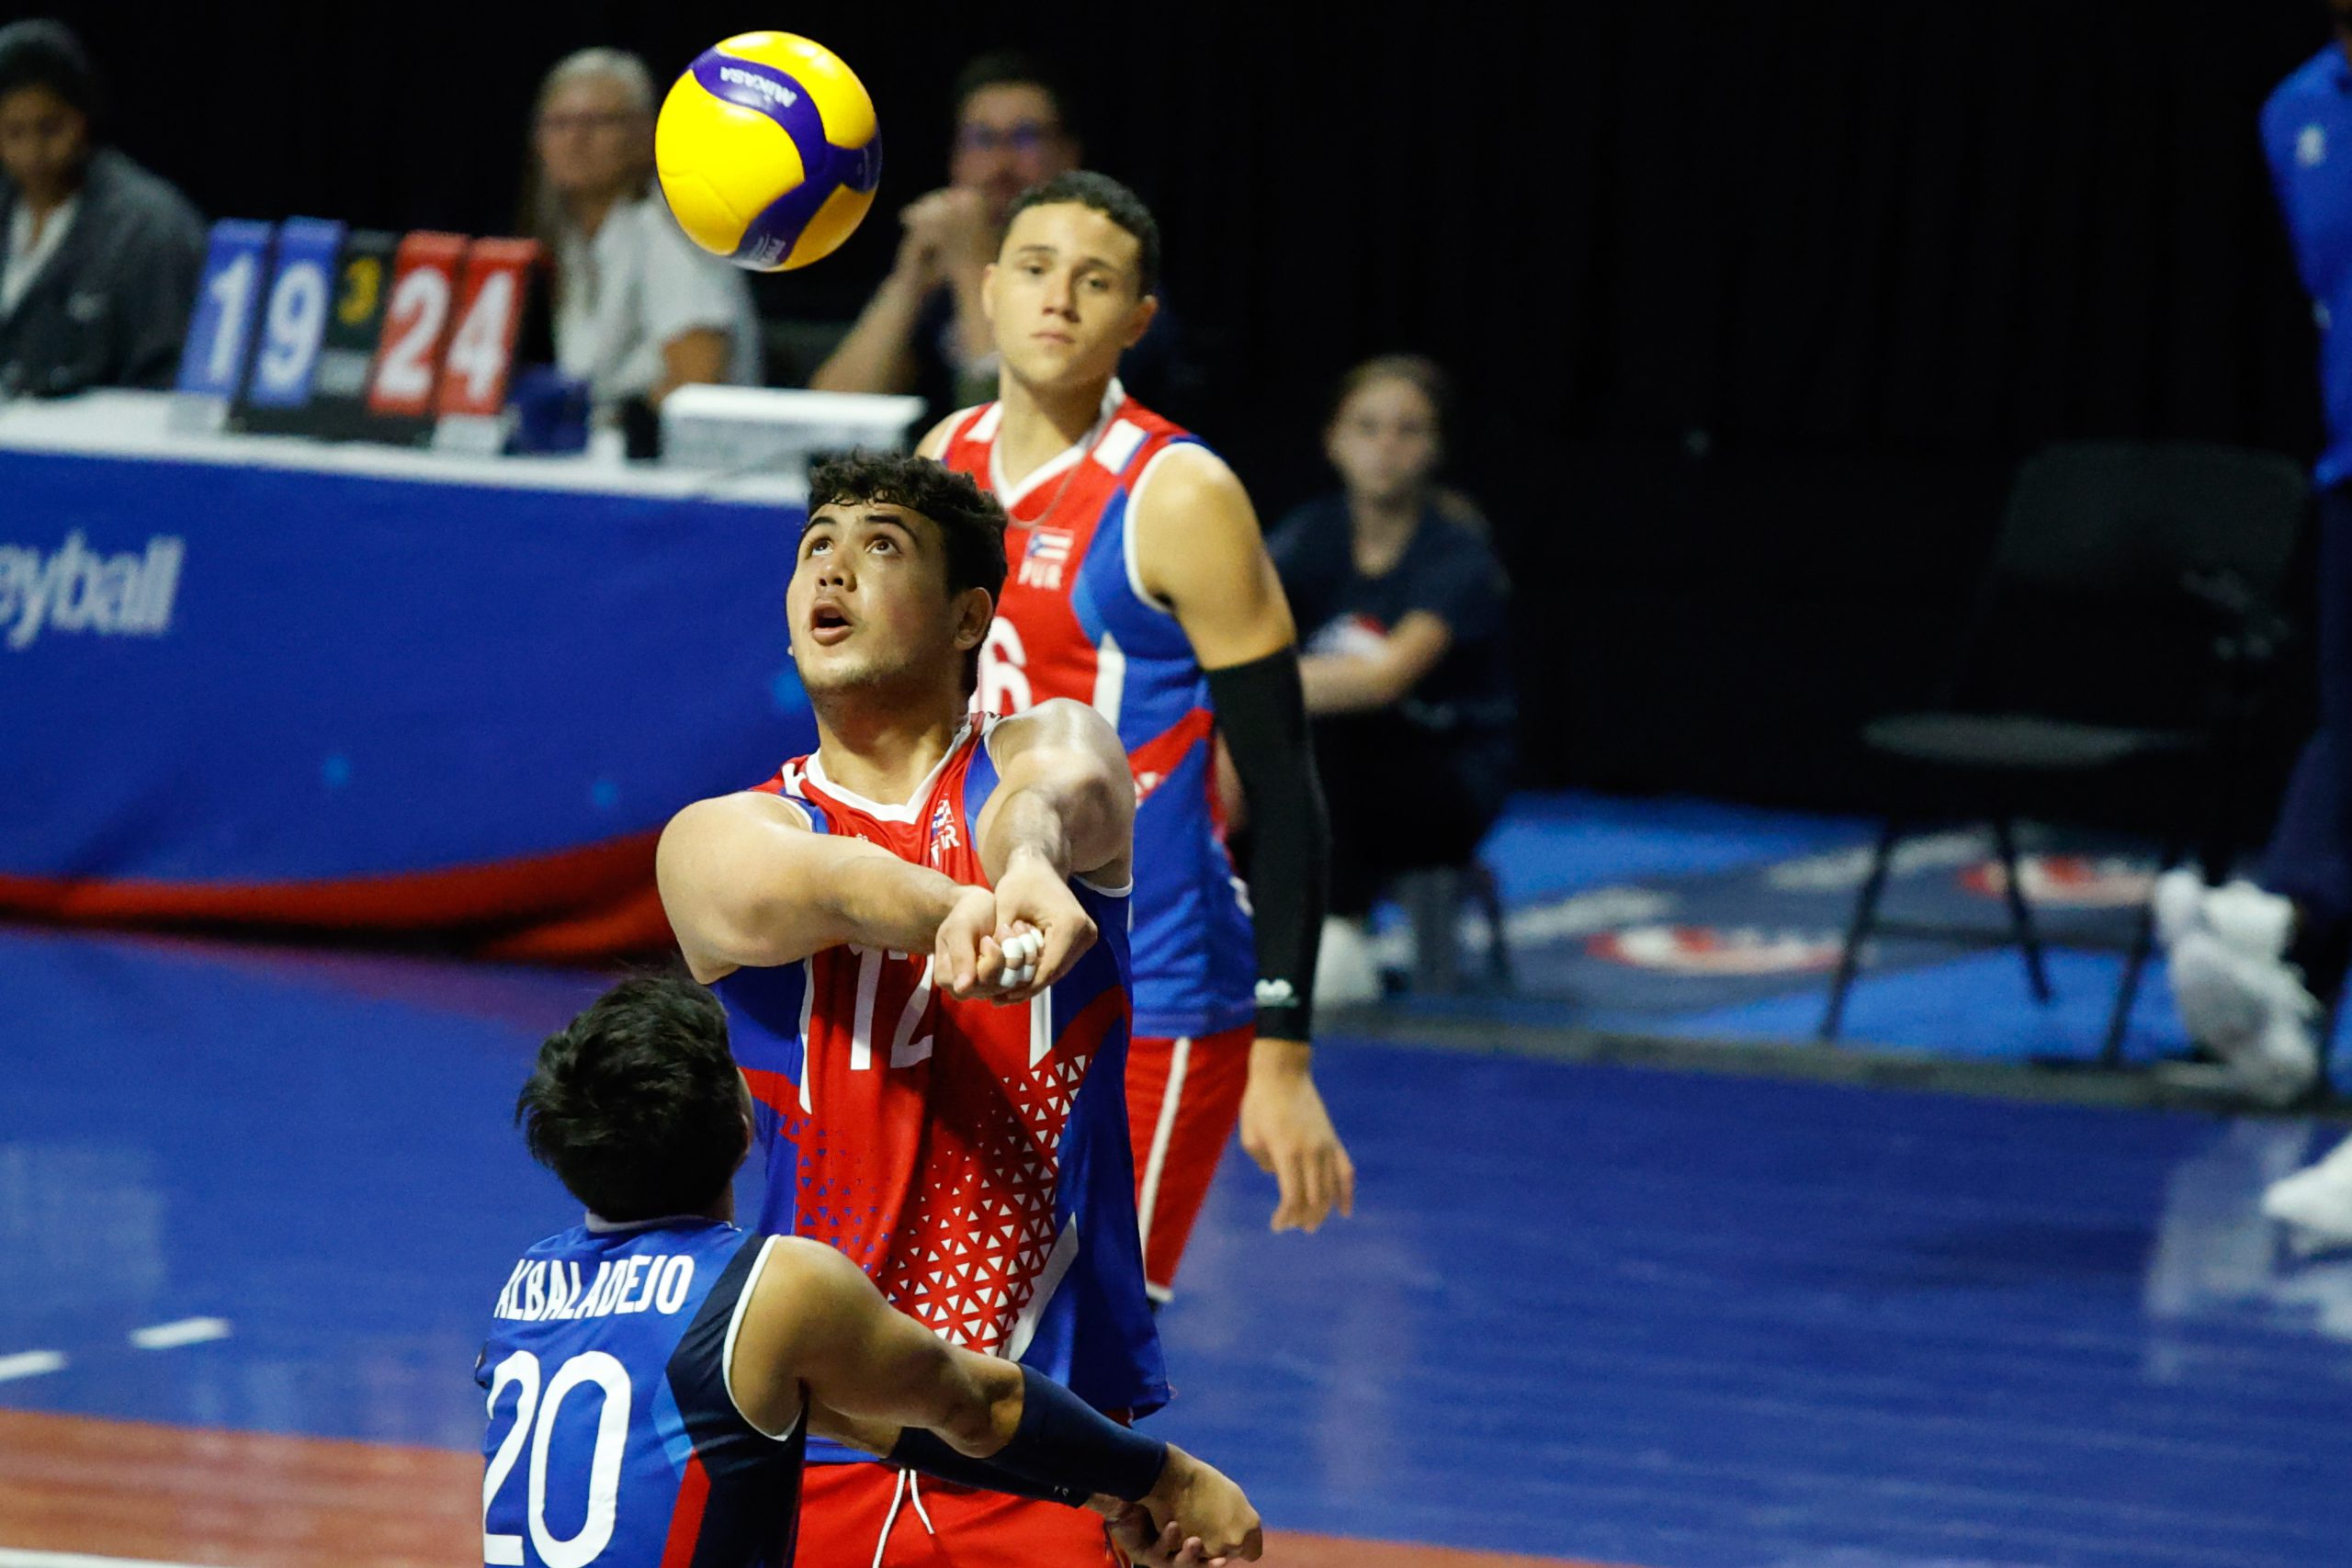 Puerto Rico beats Suriname in Four to Finish NORCECA Championship in Sixth